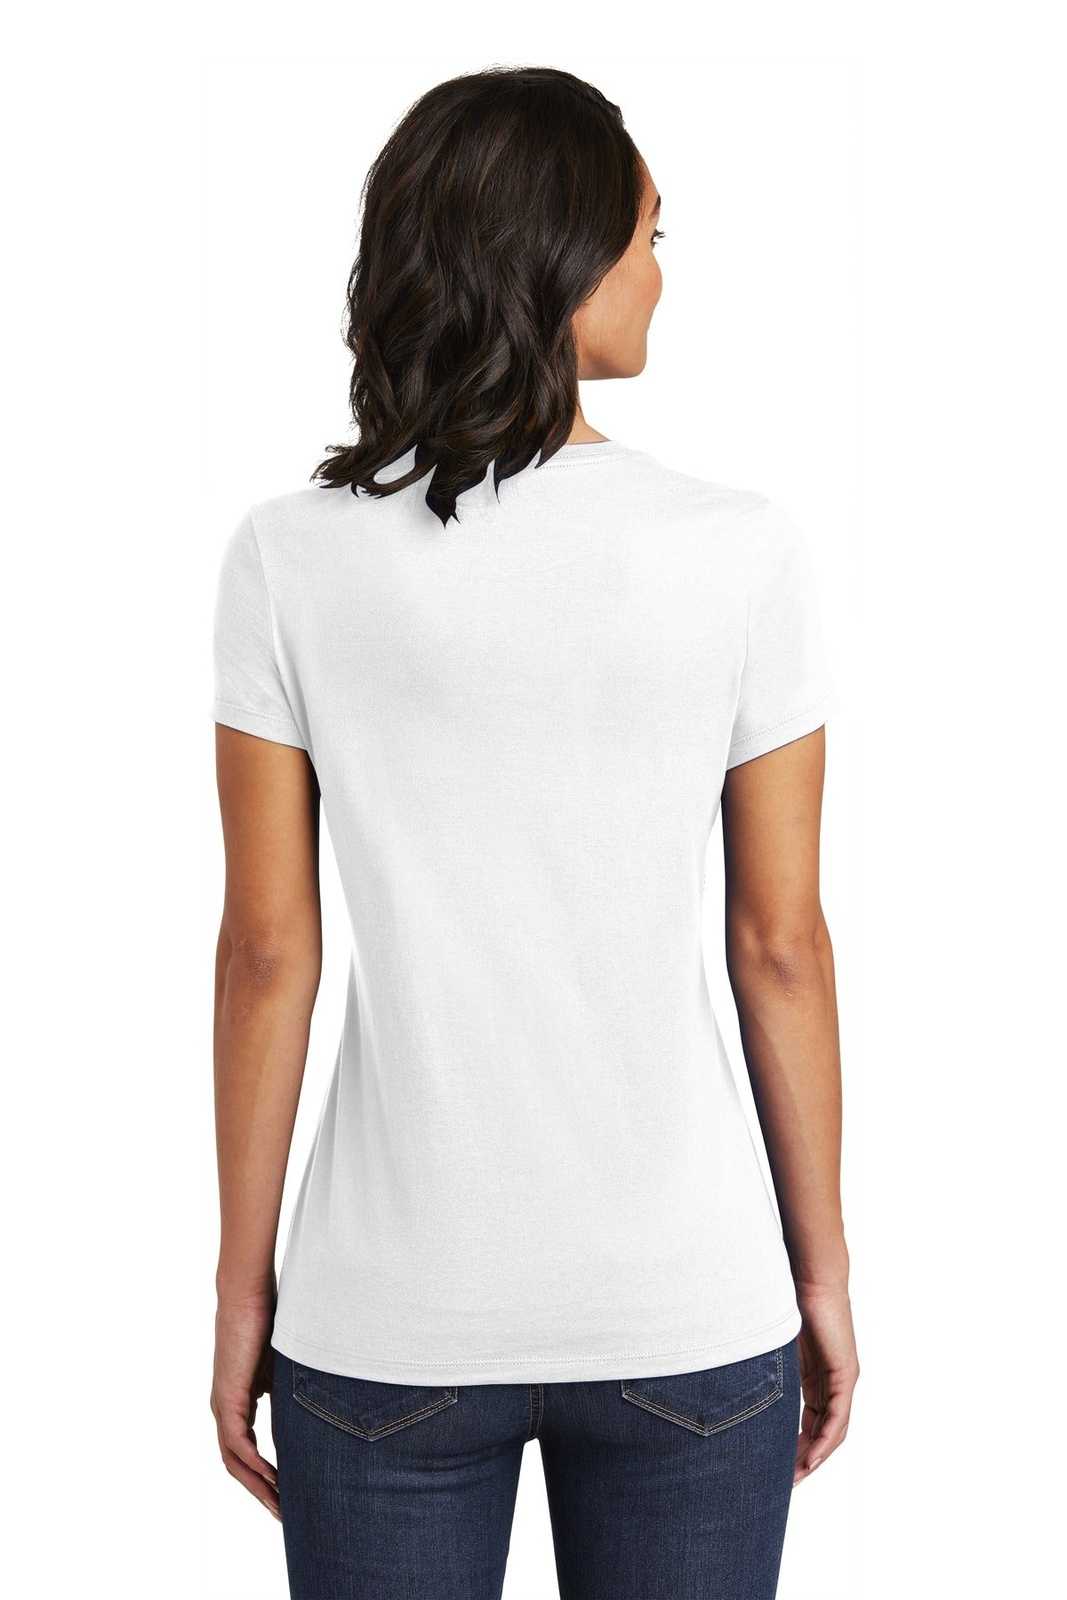 District DT6002 Women's Very Important Tee - White - HIT a Double - 1